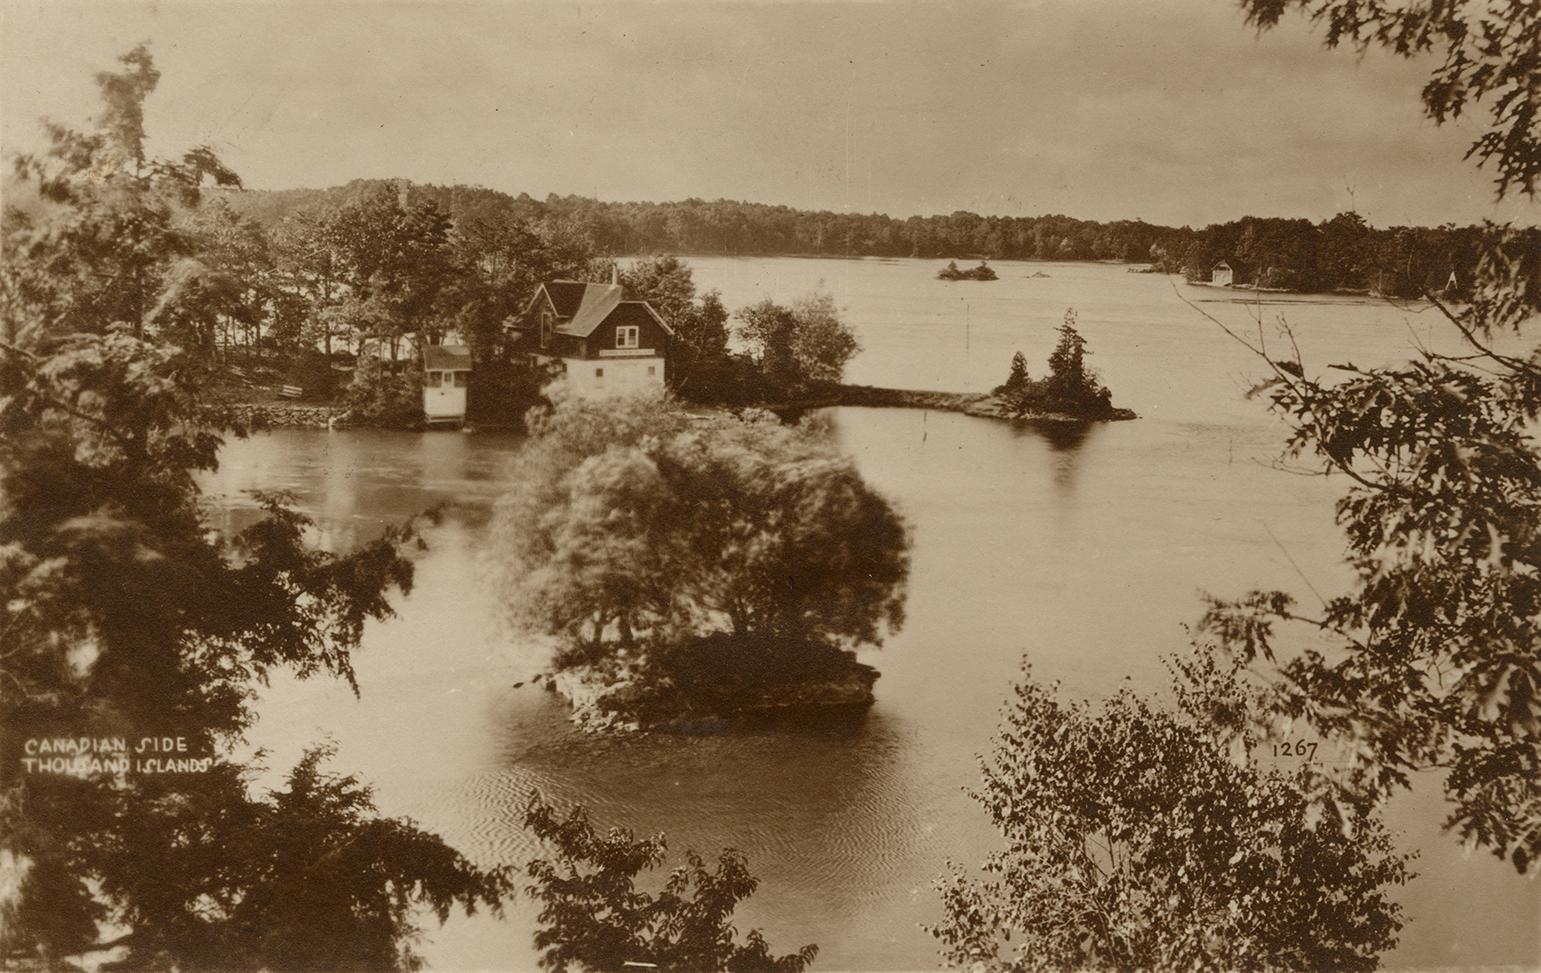 Sepia toned photograph of islands in the middle of a wide river. One Island has a house on it.